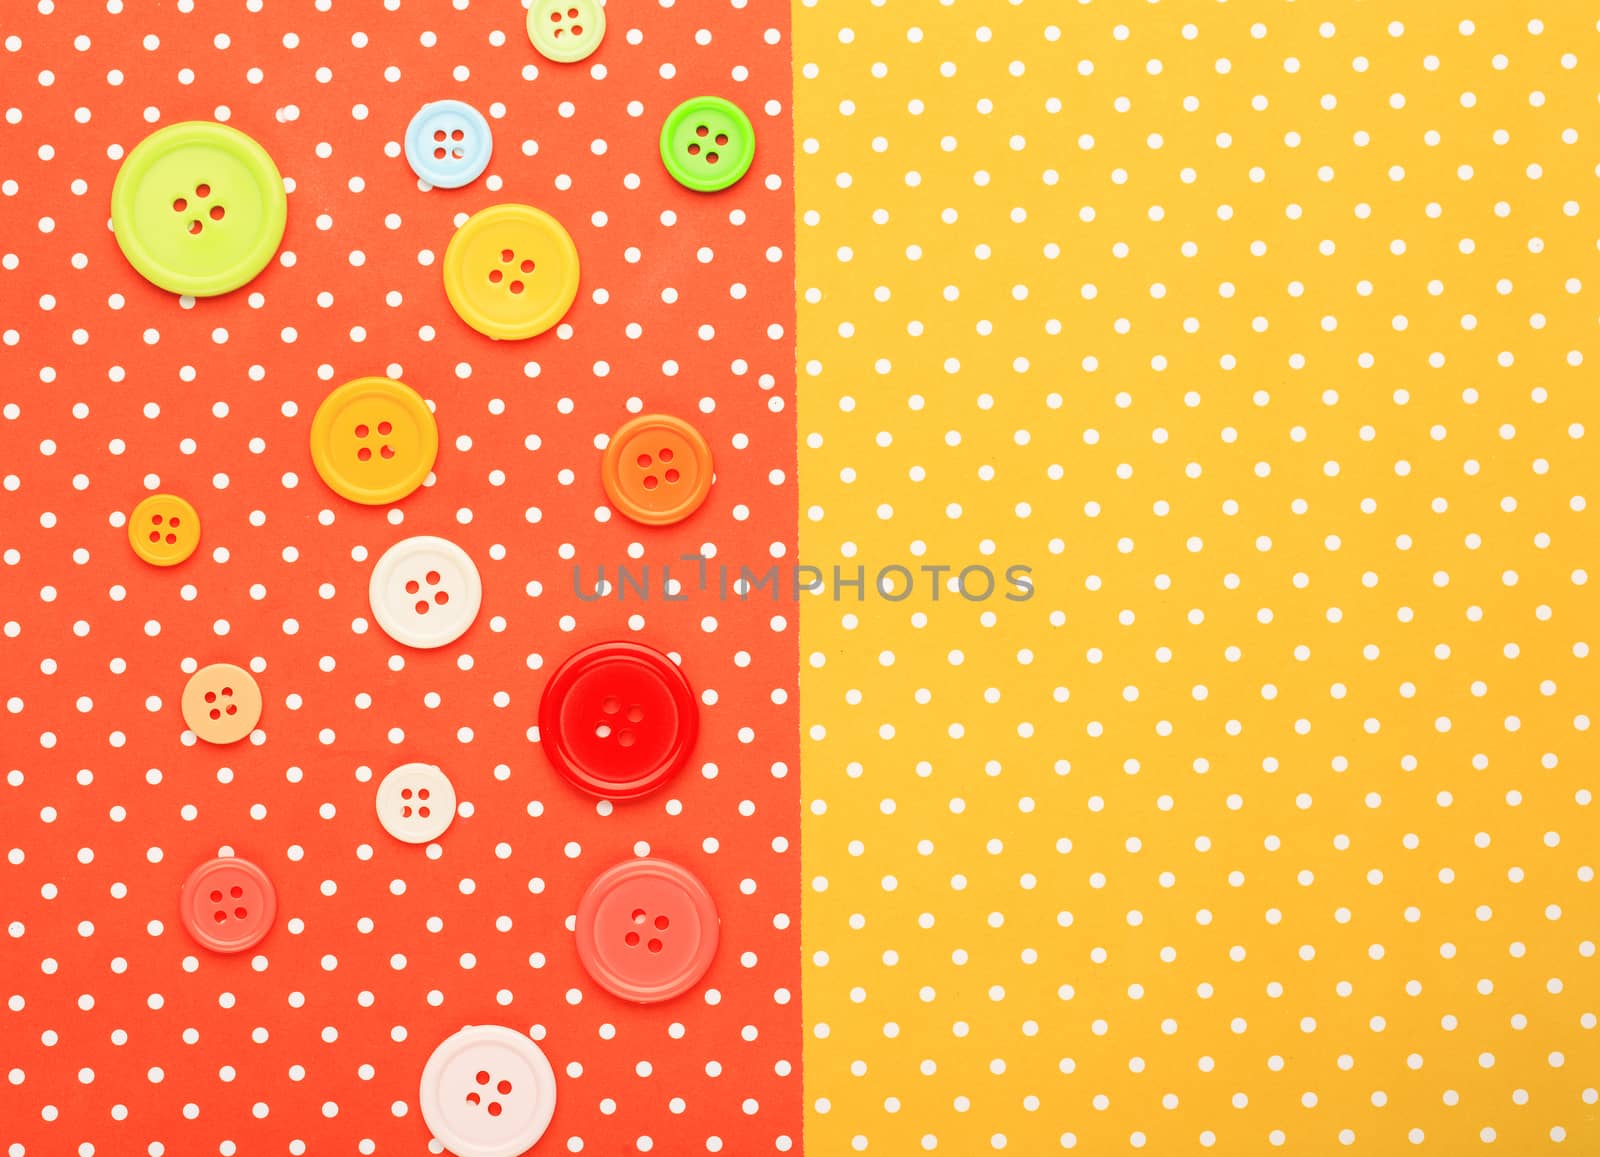 Buttons with colorful topped background by nachrc2001